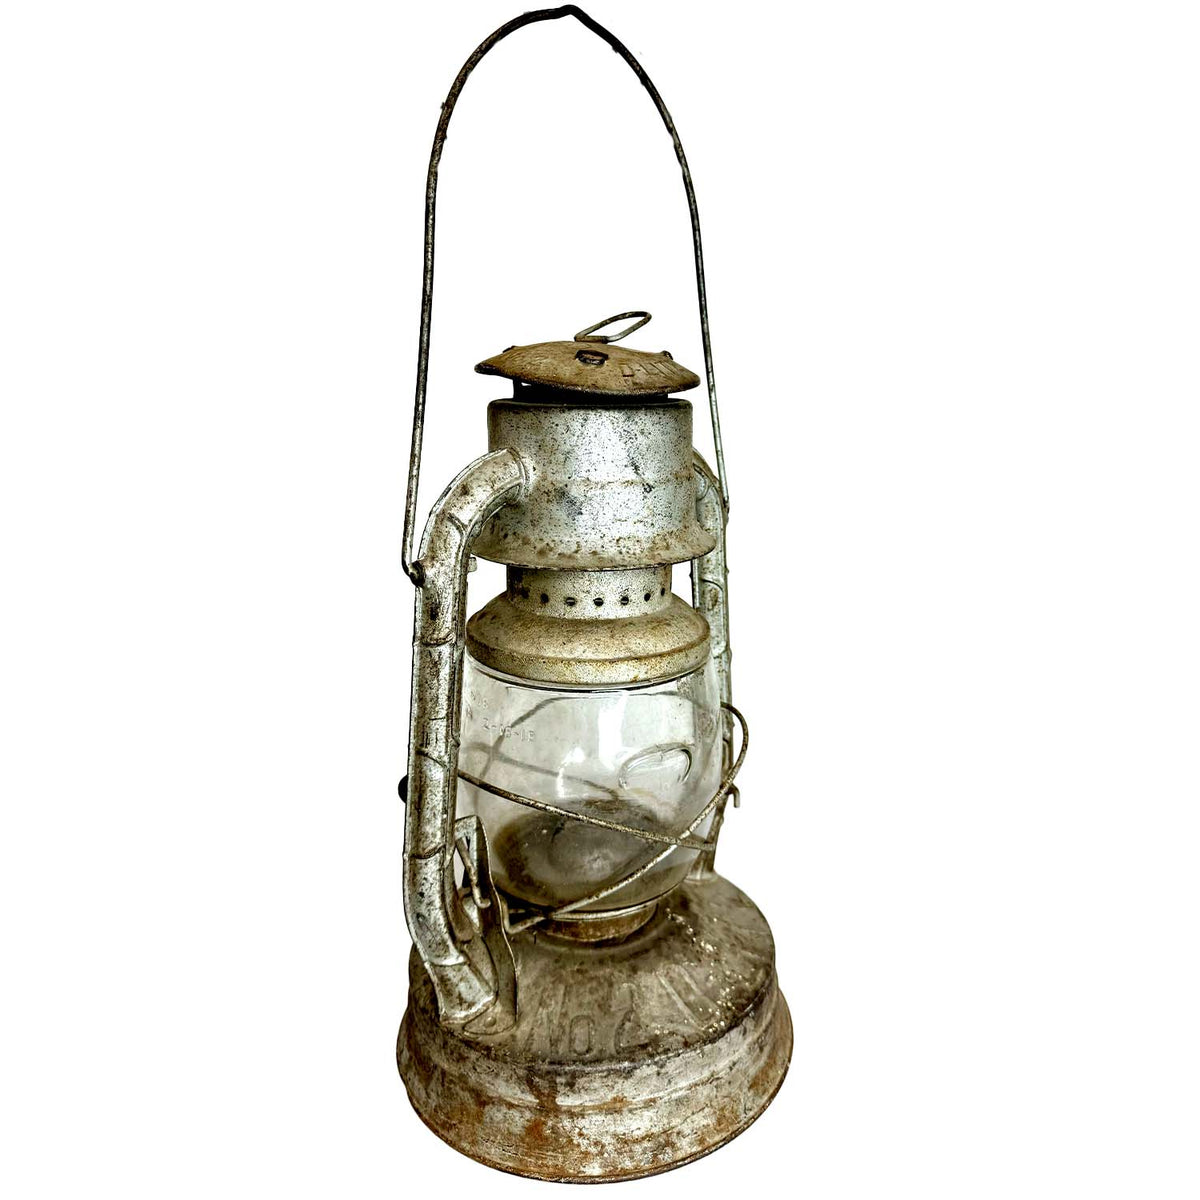 Old Fashioned Rustic SIlver Lantern Prop